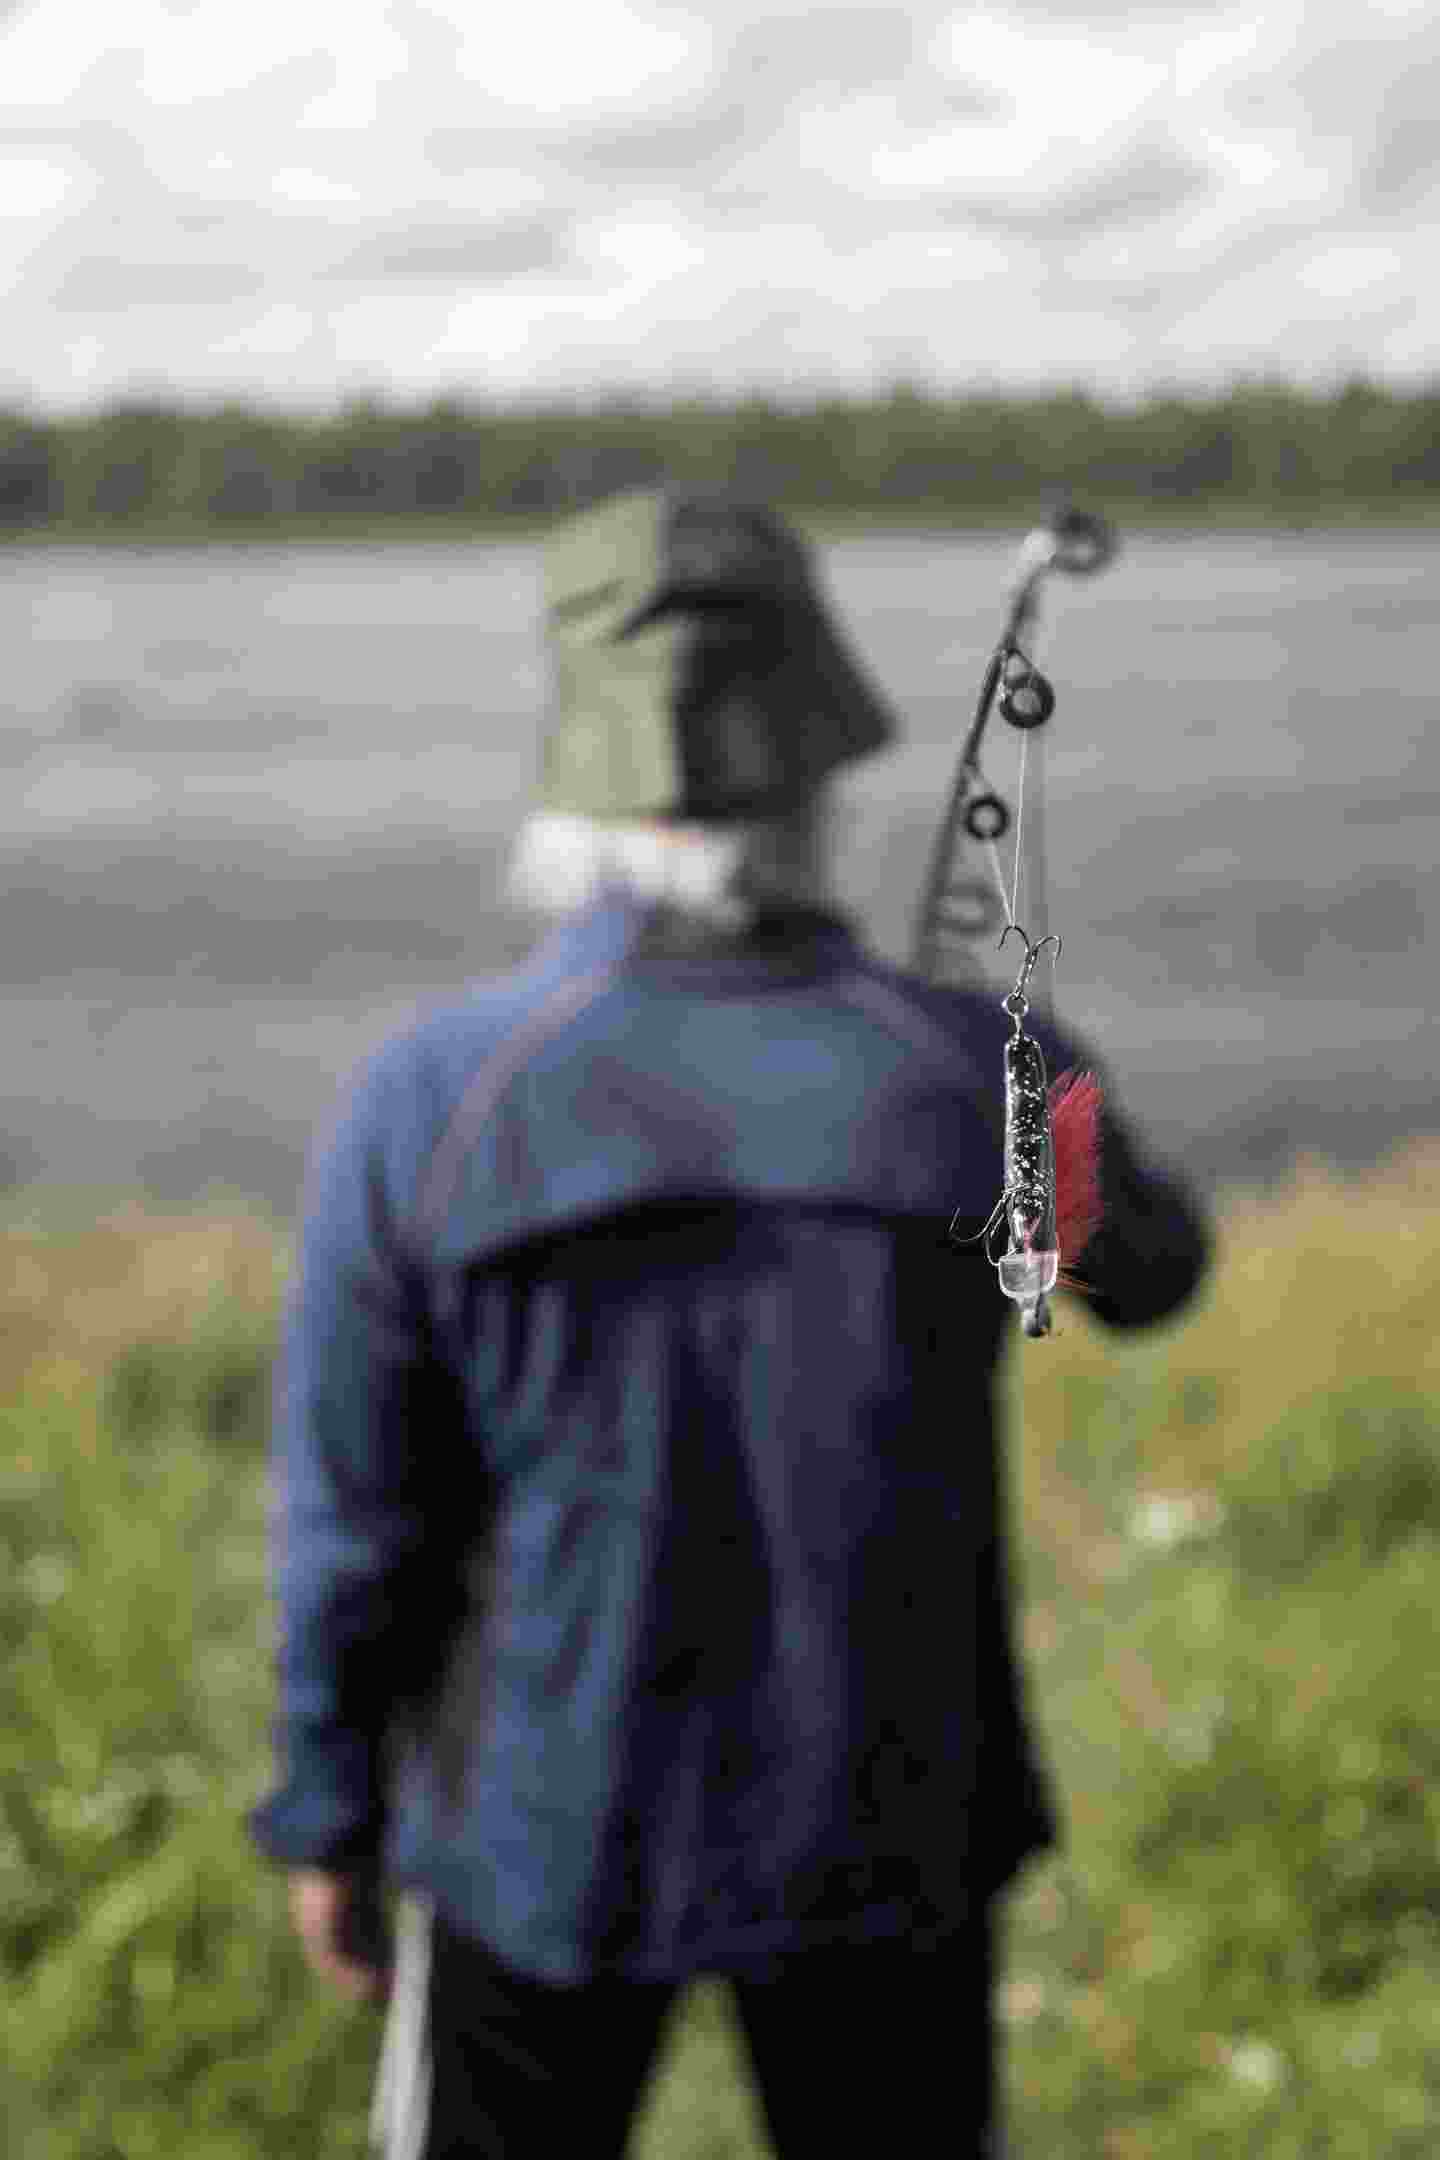 A person standing by a river and holding a fishing rod in his hand.